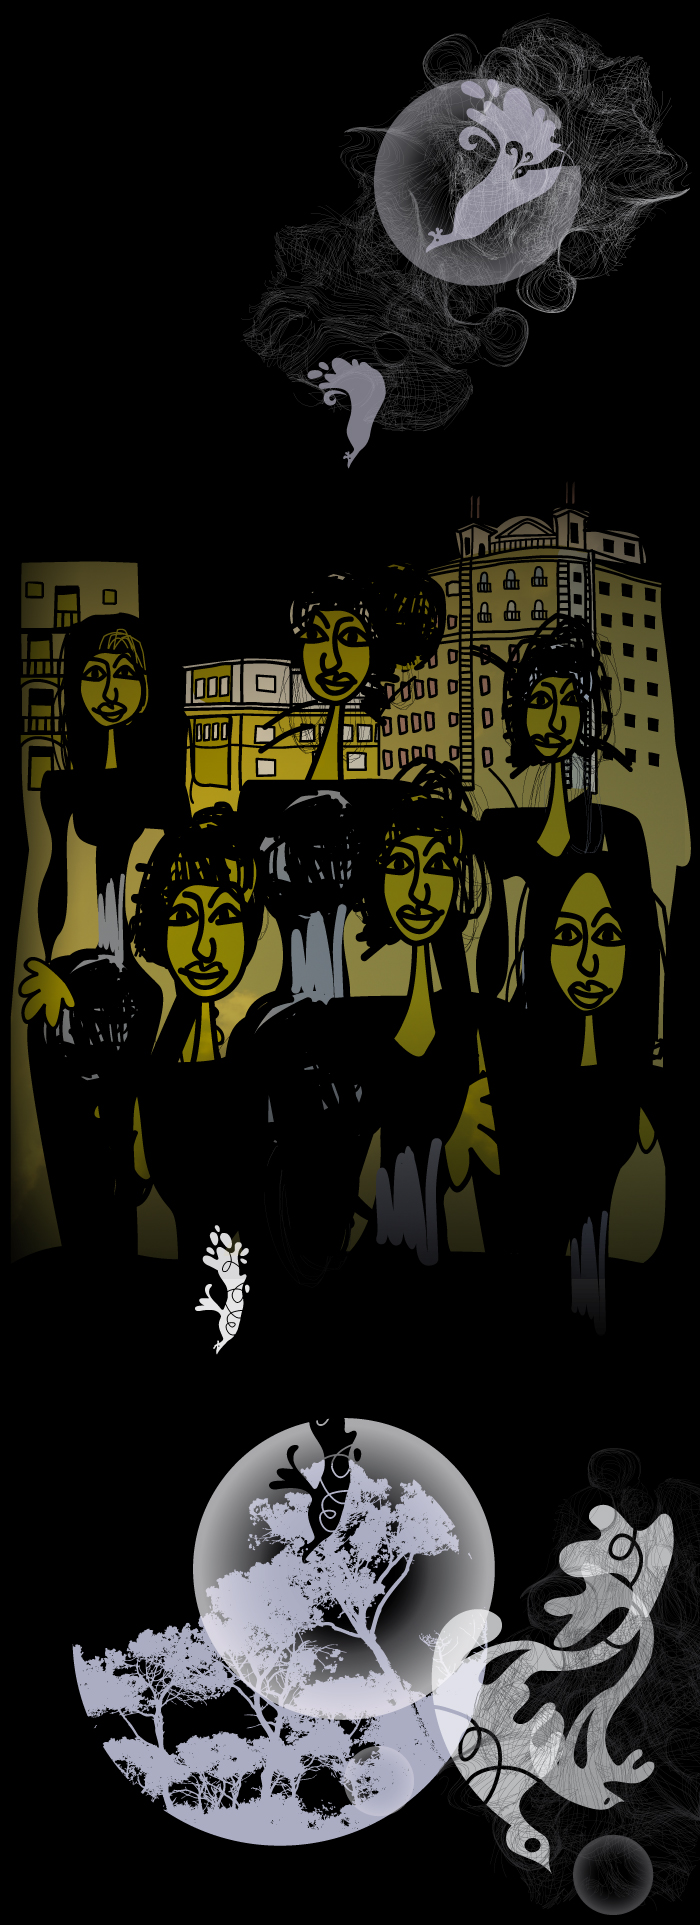 Women in the city, illustrated by Montse Noguera